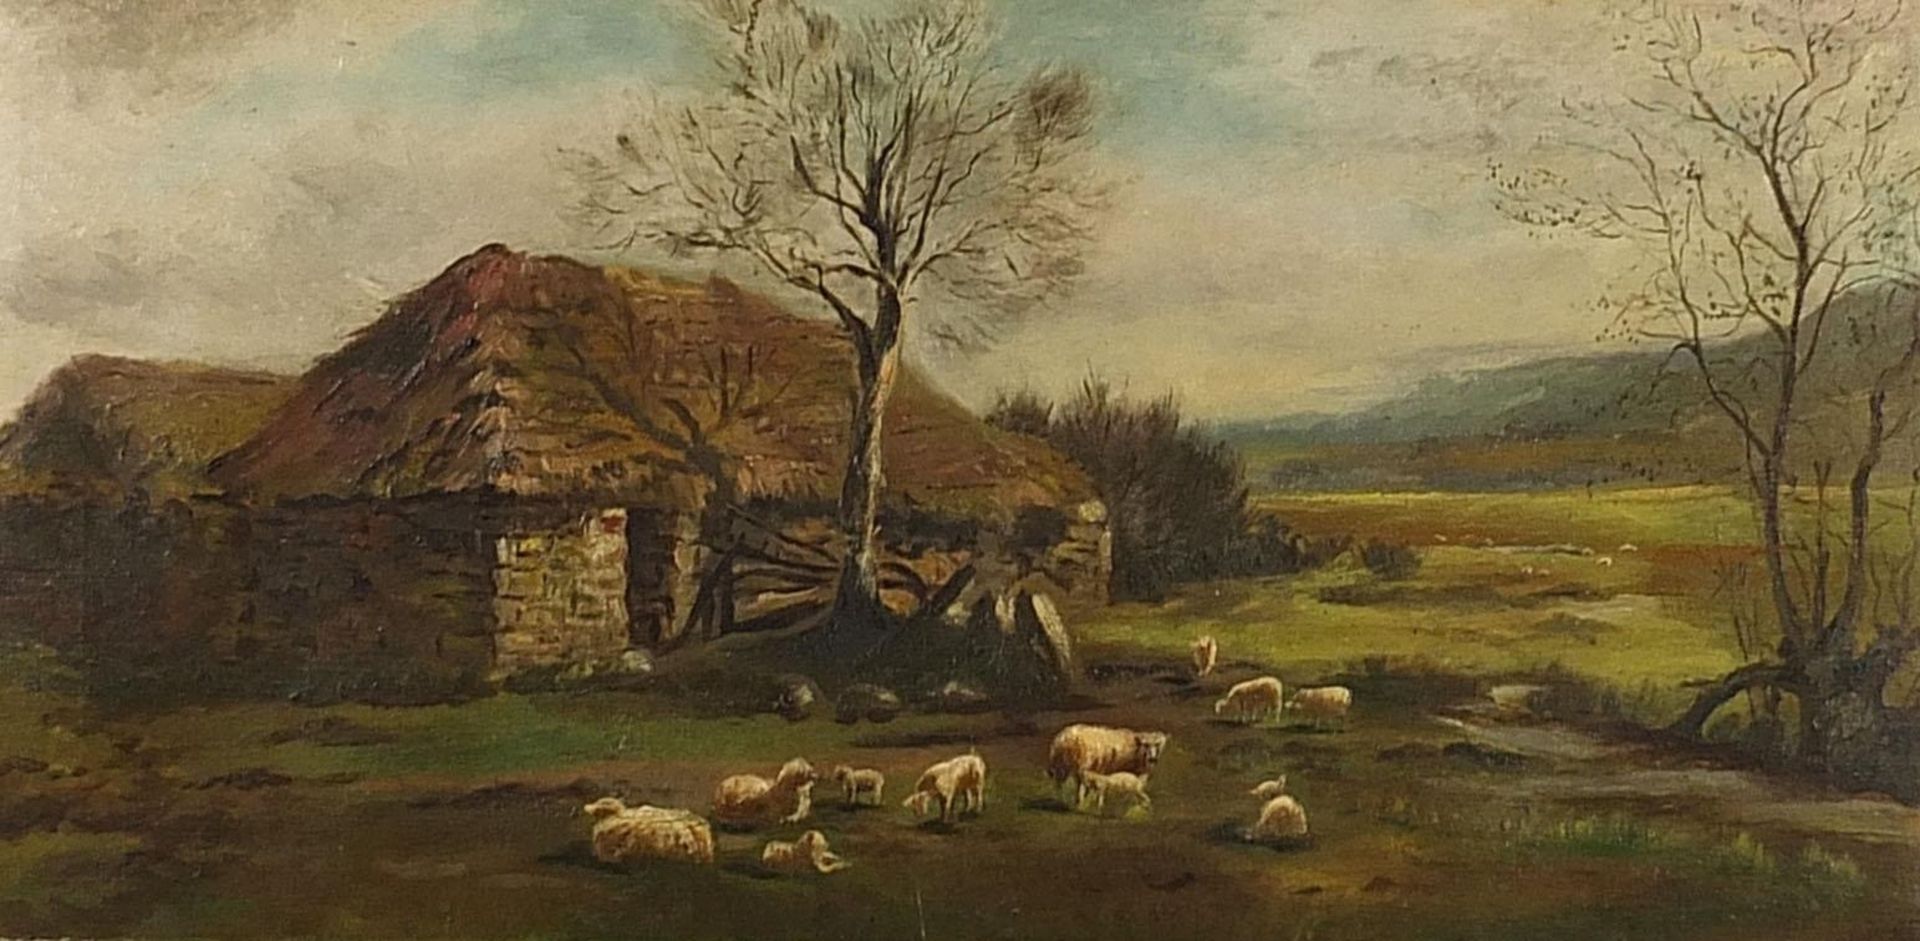 Sheep before a cottage and landscape, oil on canvas, mounted and framed, 59.5cm x 29.5cm excluding